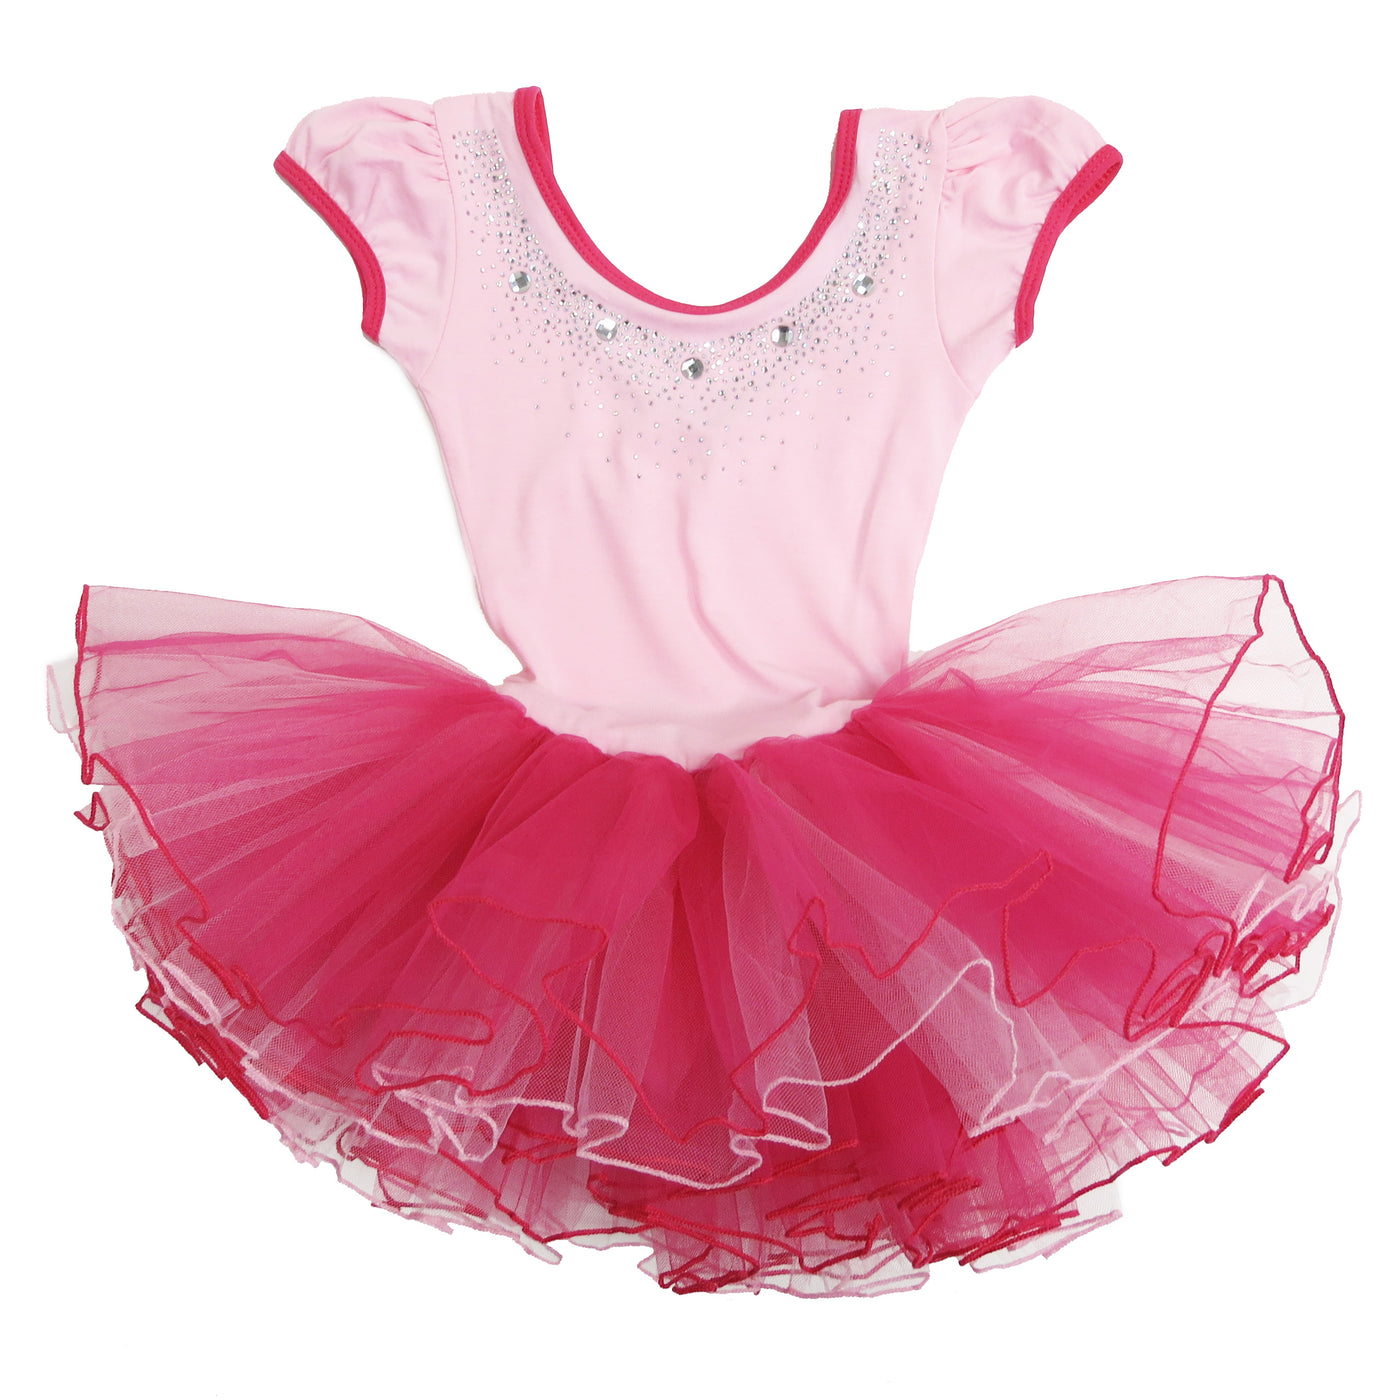 Pink Lace Ballet Girl Short Sleeve Ballet Dress Wenchoice 